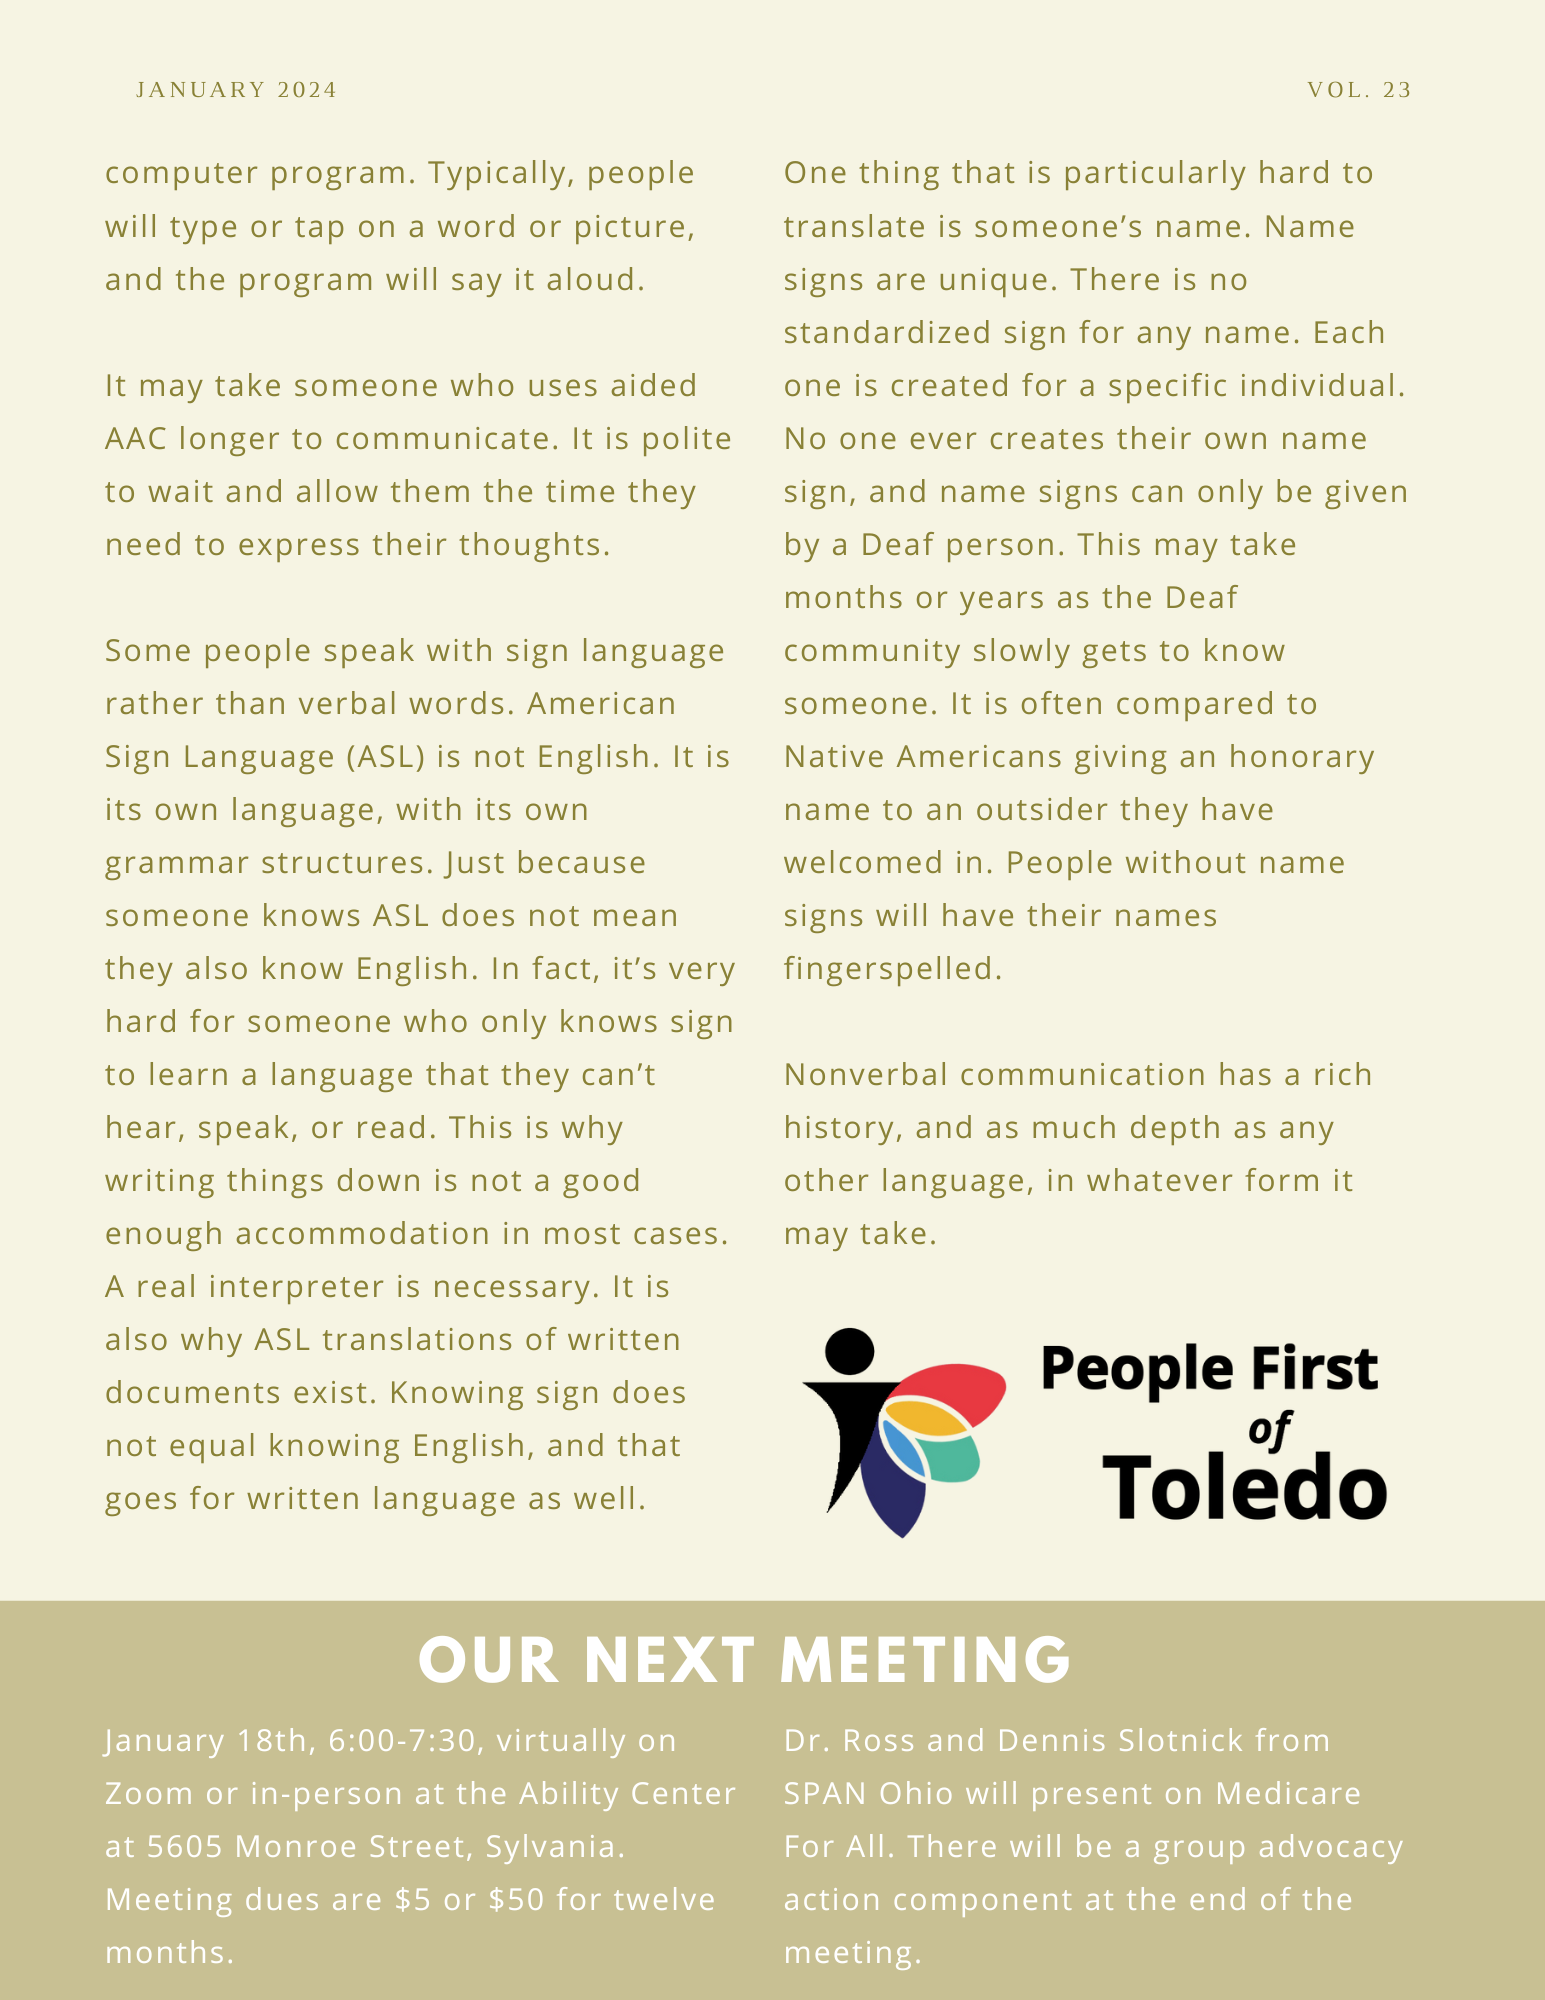 The back page of People First of Toledo's January 2024 newsletter.